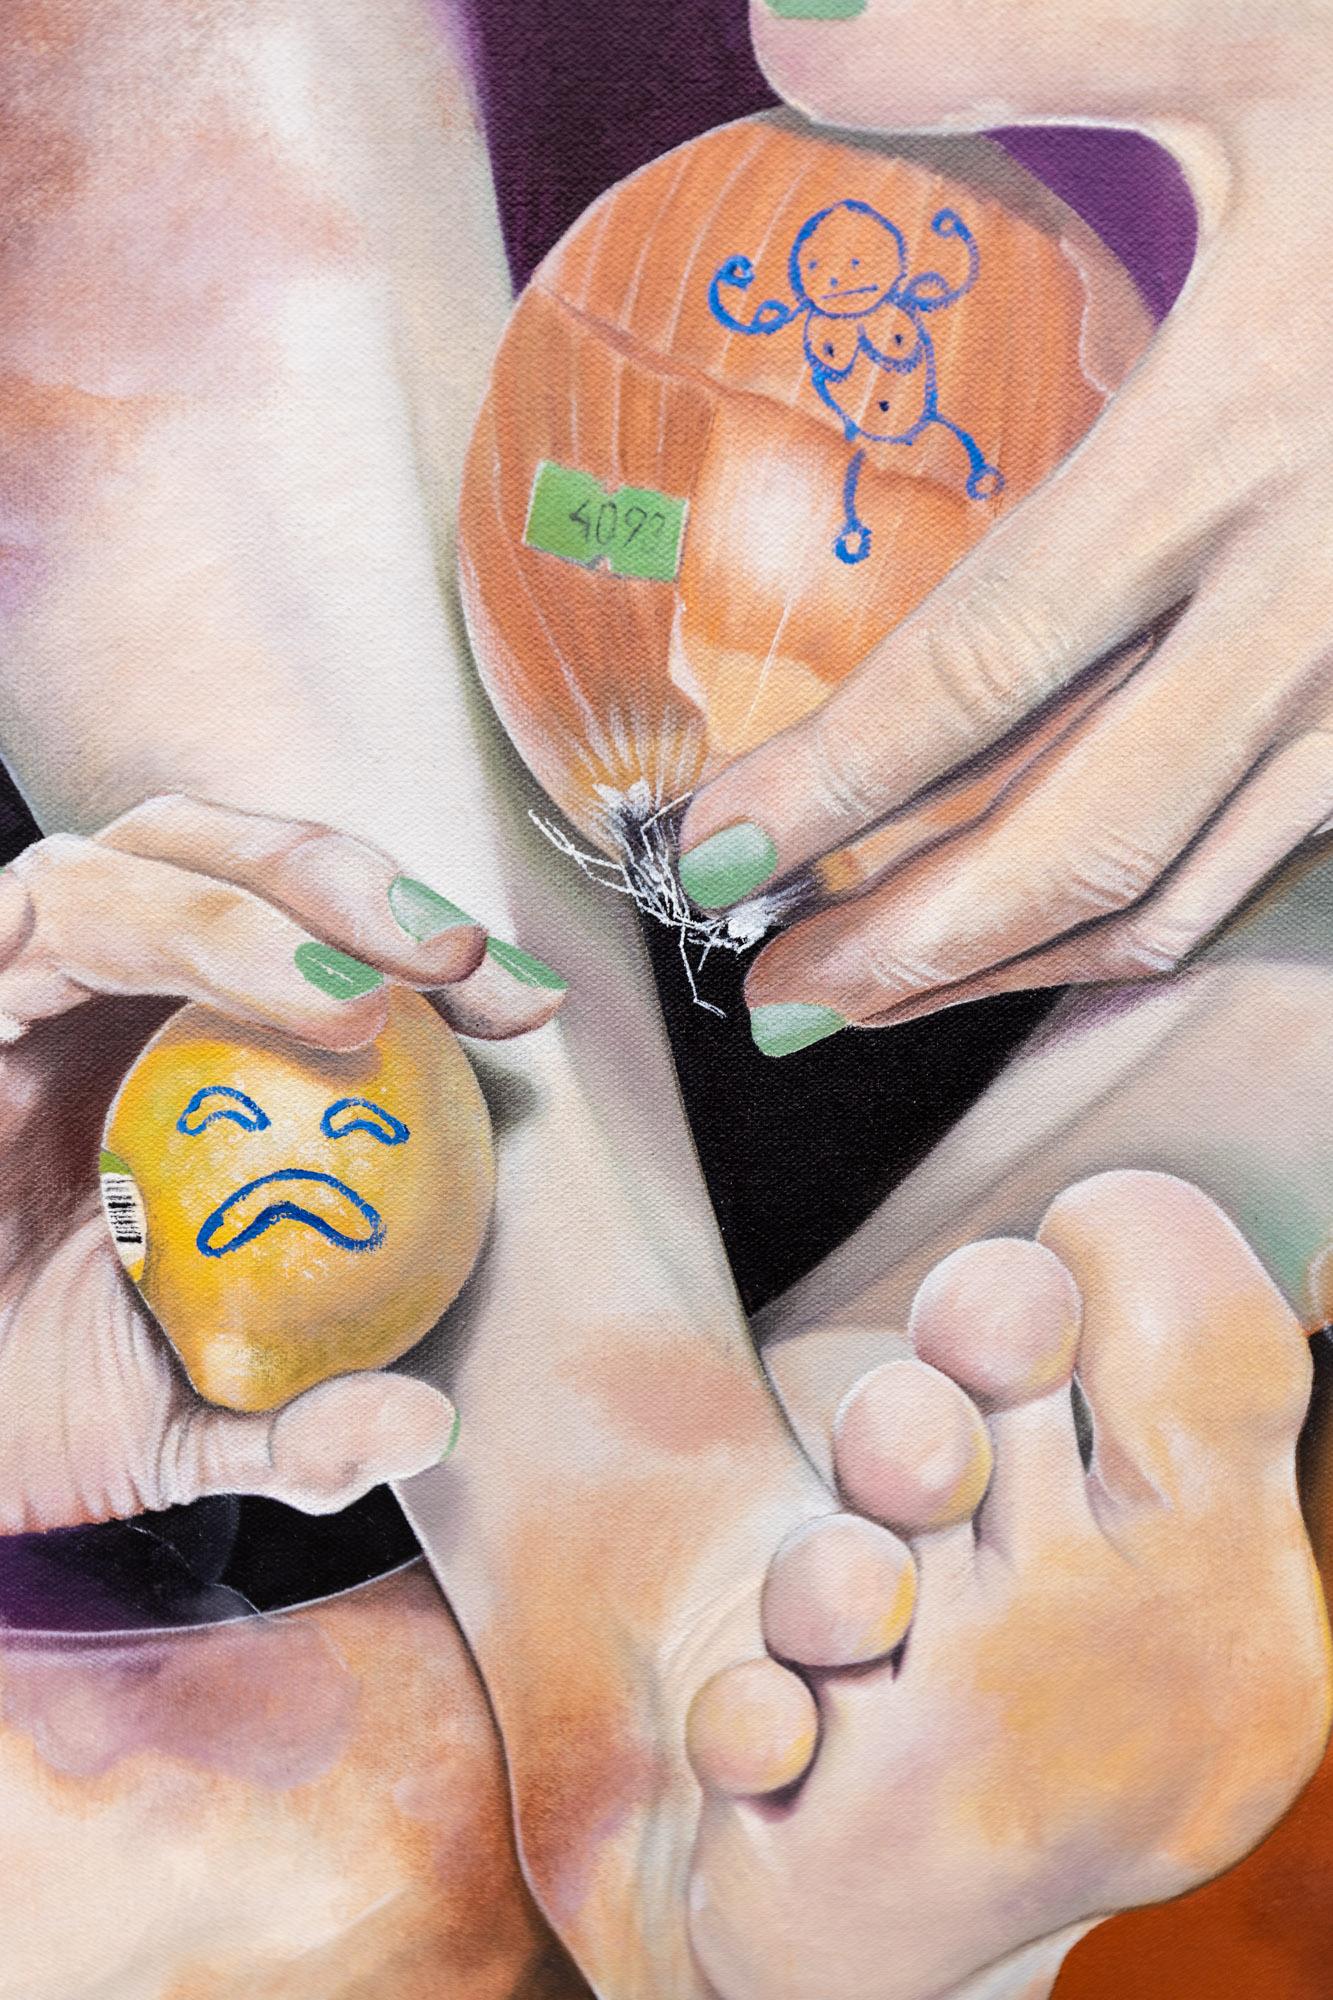 Comparing Onions and Lemons - Painting by Elizabeth Bergeland